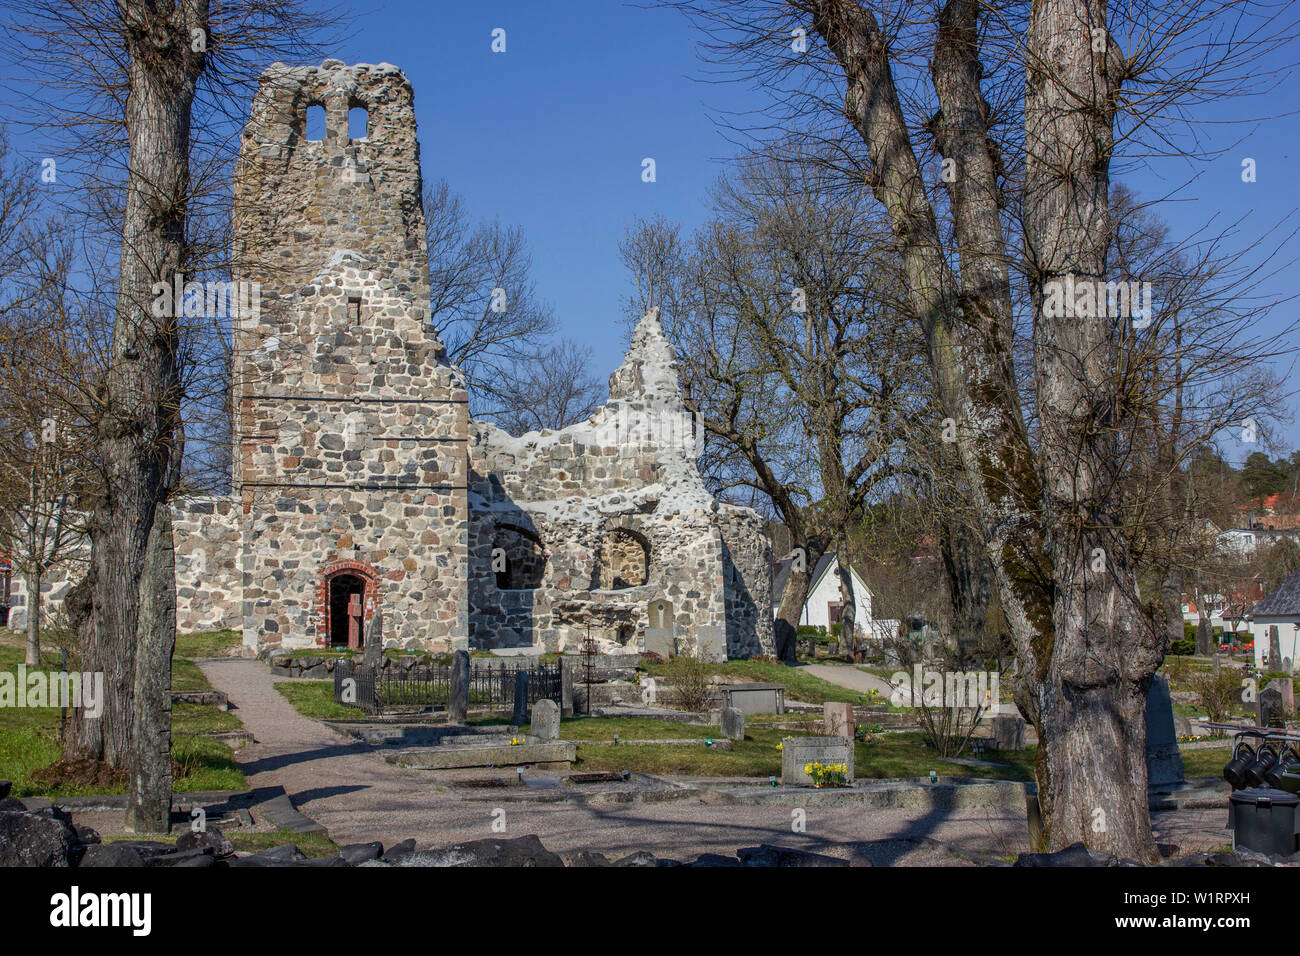 St Olaf Church ruins and surrounding graveyard in the ancient town of Sigtuna, Sweden Stock Photo